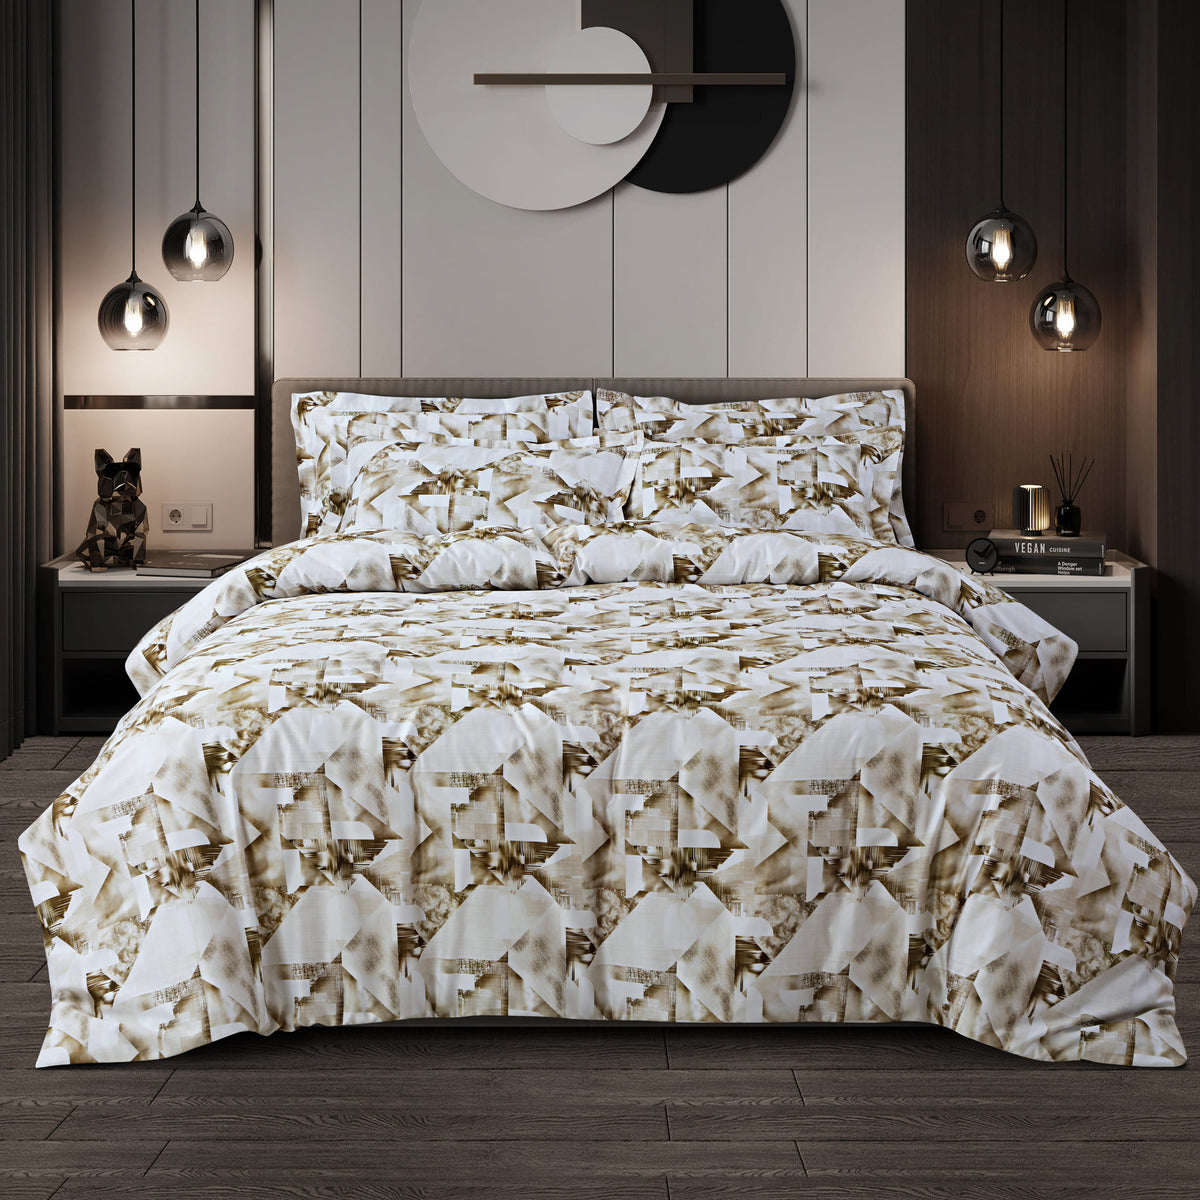 Malako Caèn Bedding Set - White & Beige Abstract 100% Cotton King Size Bedsheet With Comforter